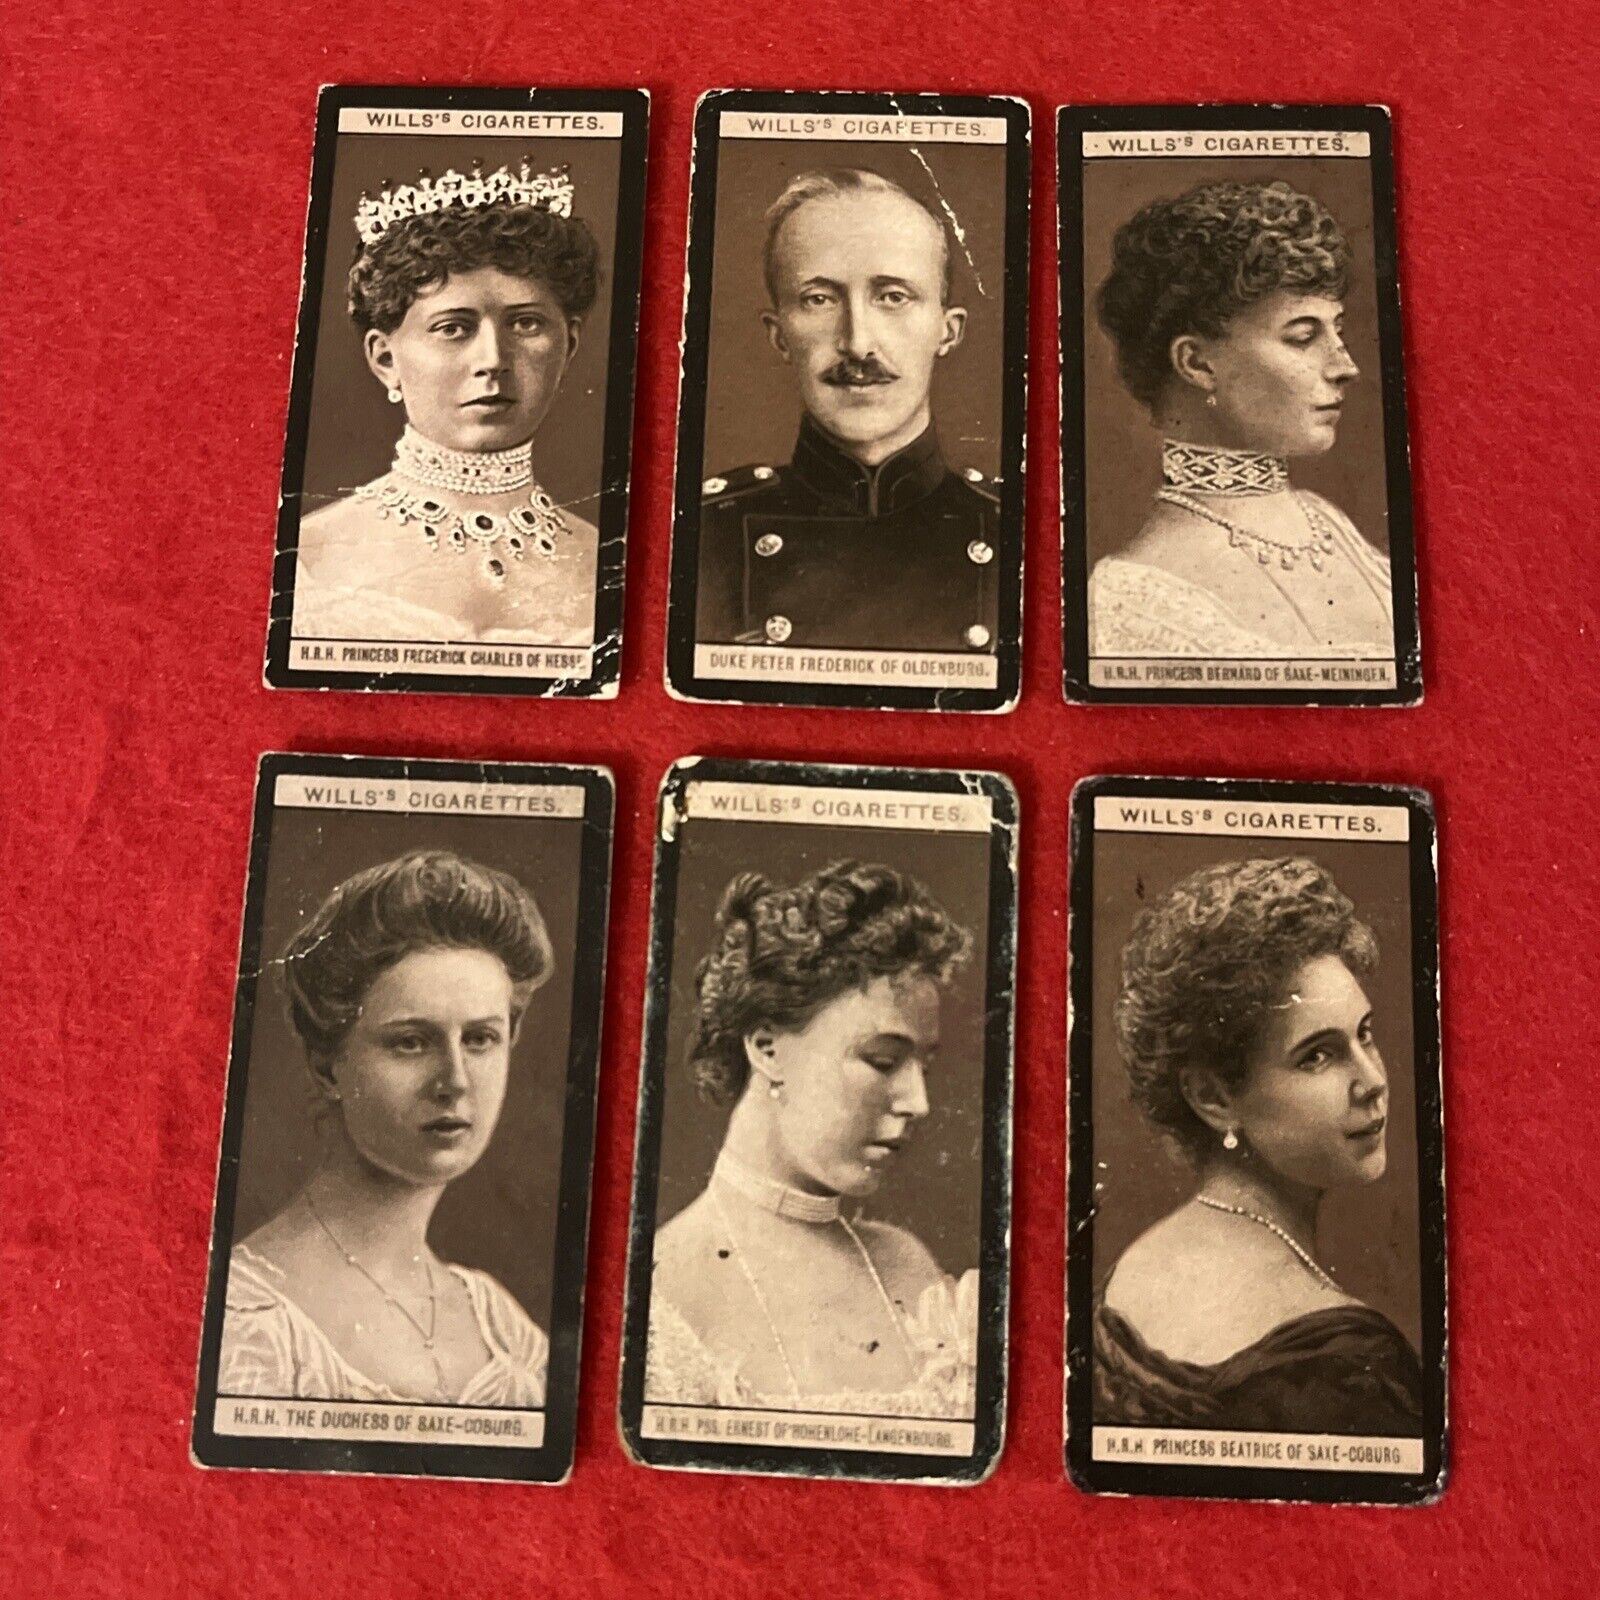 1908 Wills Cigarettes “European Royalty” Tobacco Card Lot (6) All F-G Condition